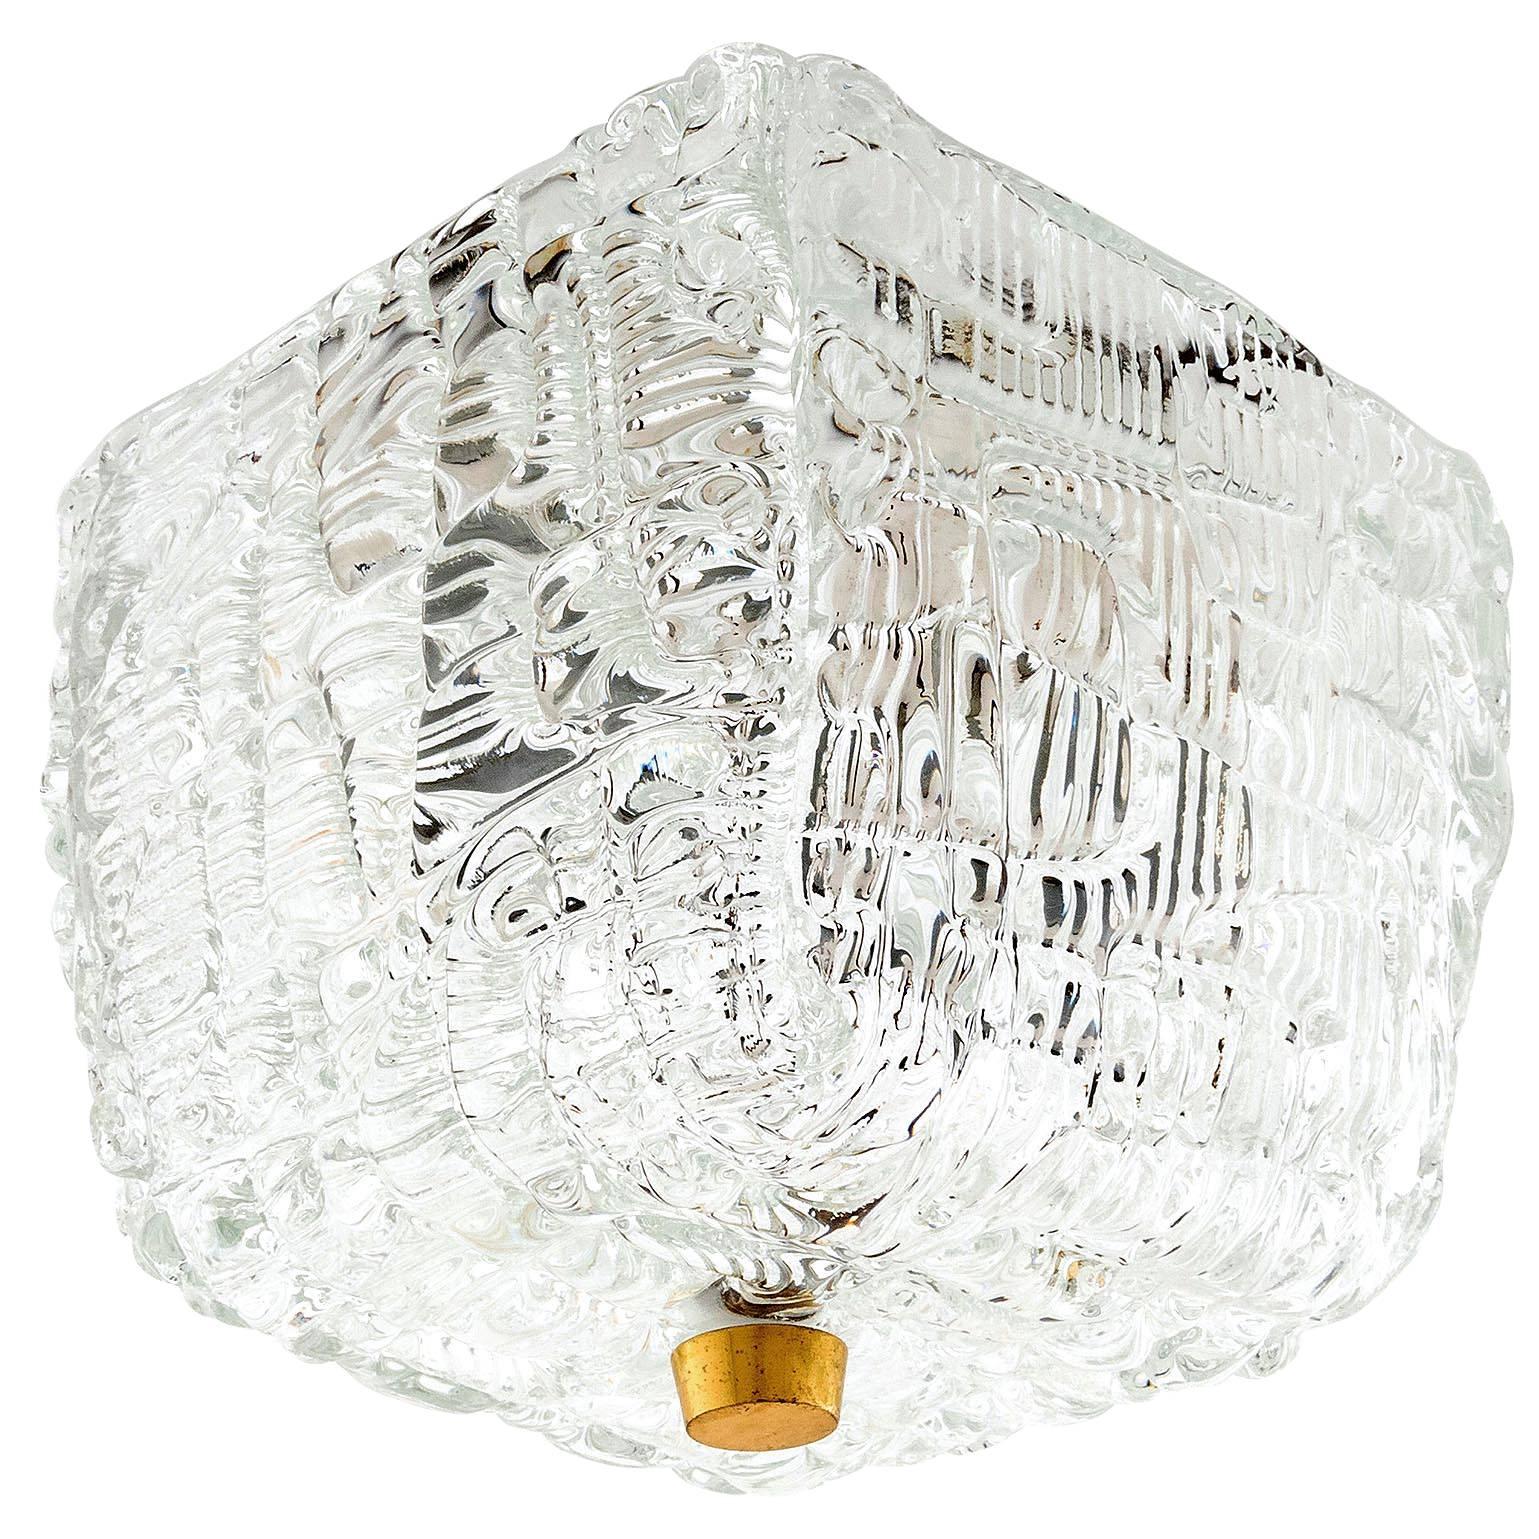 One of three square flush mount light fixtures by Kalmar, Austria, manufactured in Mid-Century, circa 1960 (late 1950s or early 1960s). 
A textured clear glass is mounted with a brass knob to a backplate. 
The lamp has two sockets for small screw